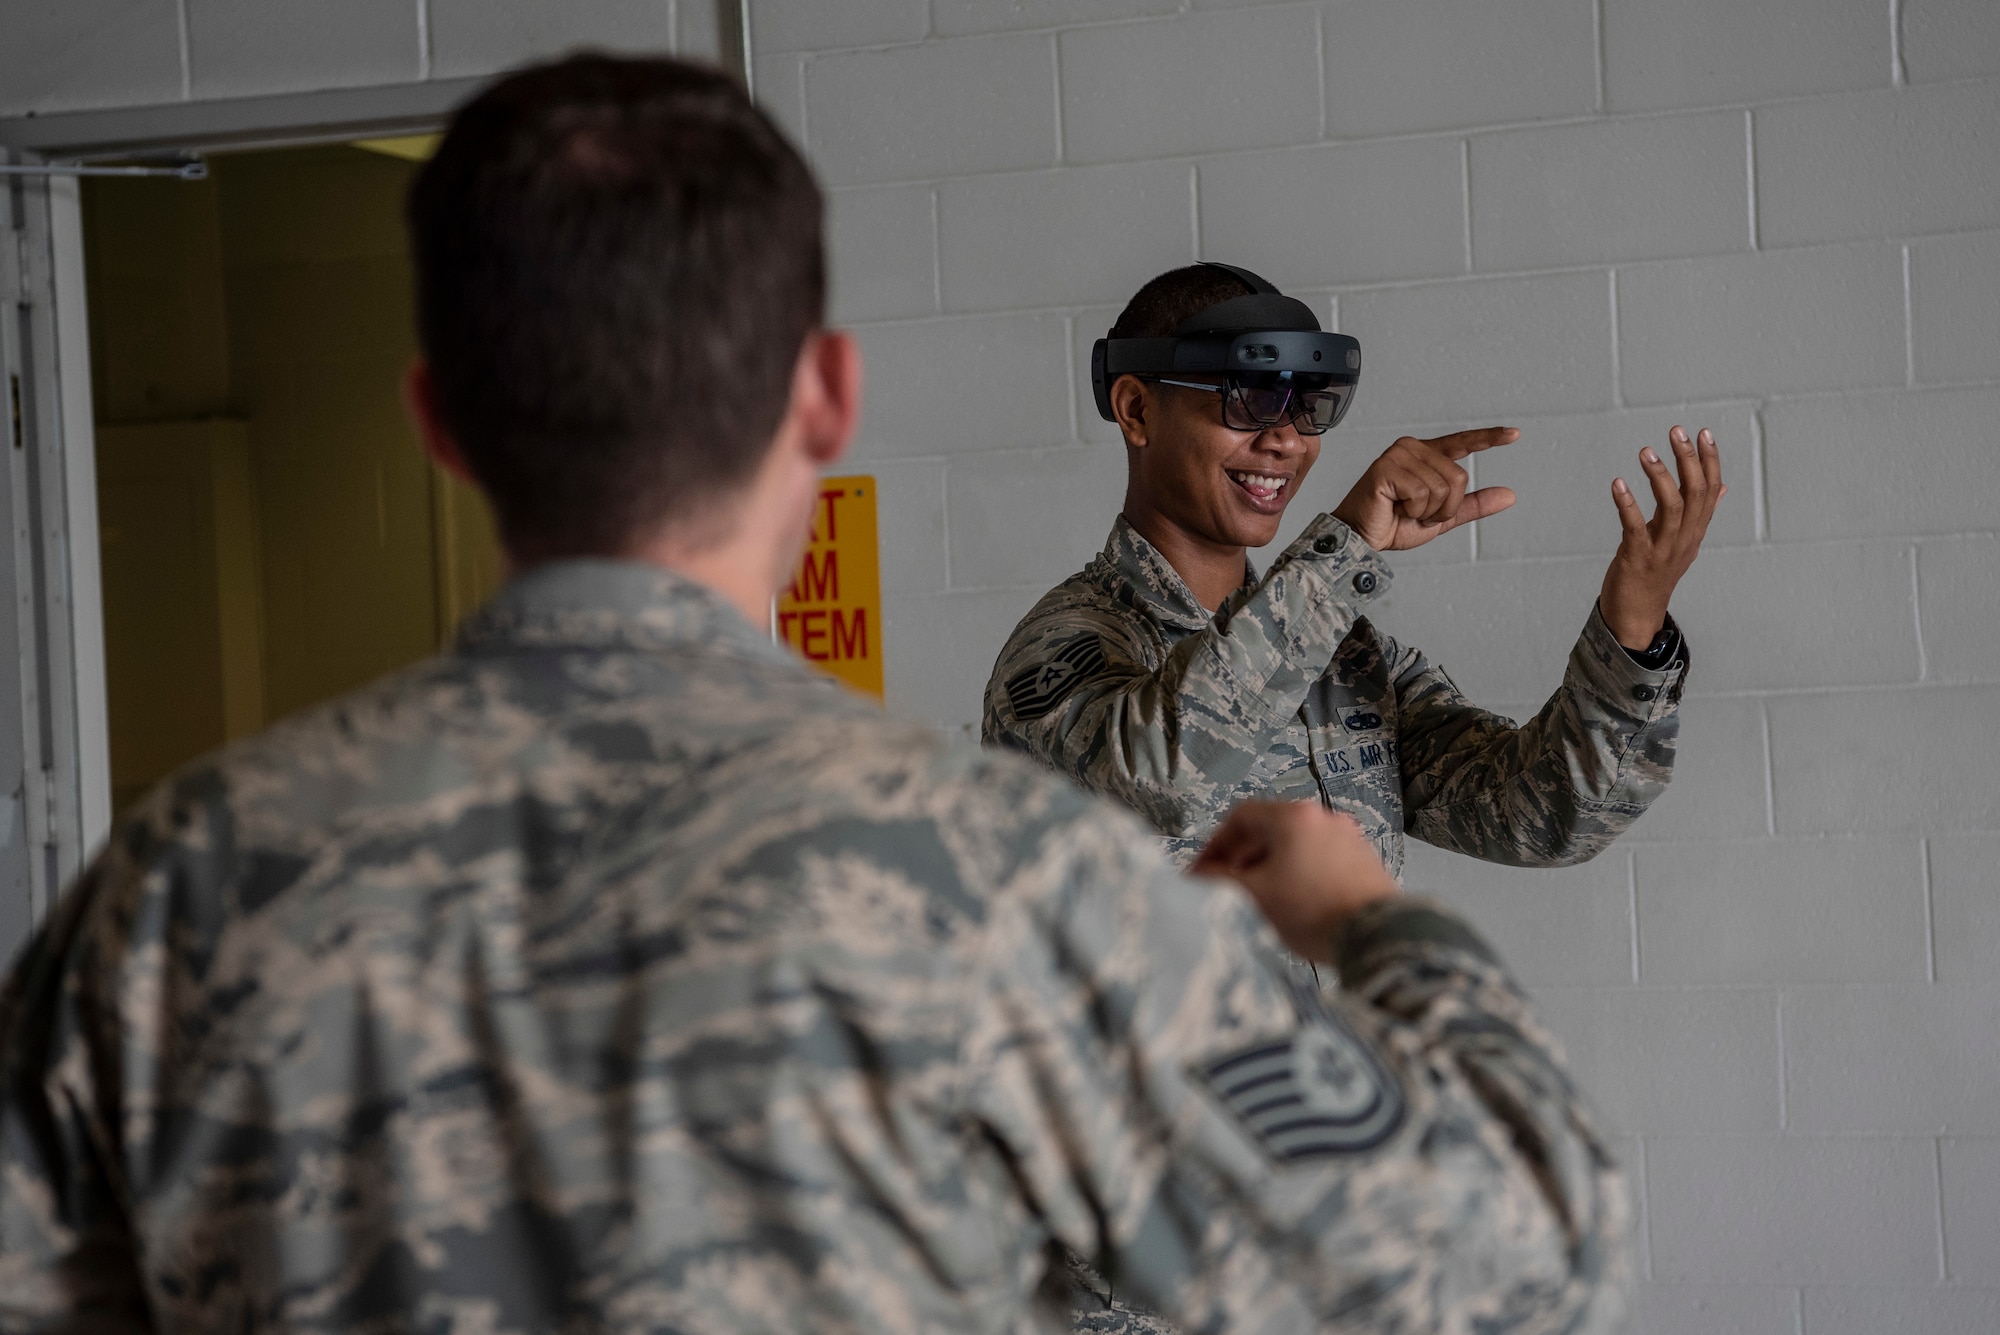 An Airman looks through an augmented reality headset at a digital technical order while another Airman directs him on how to use the gear.